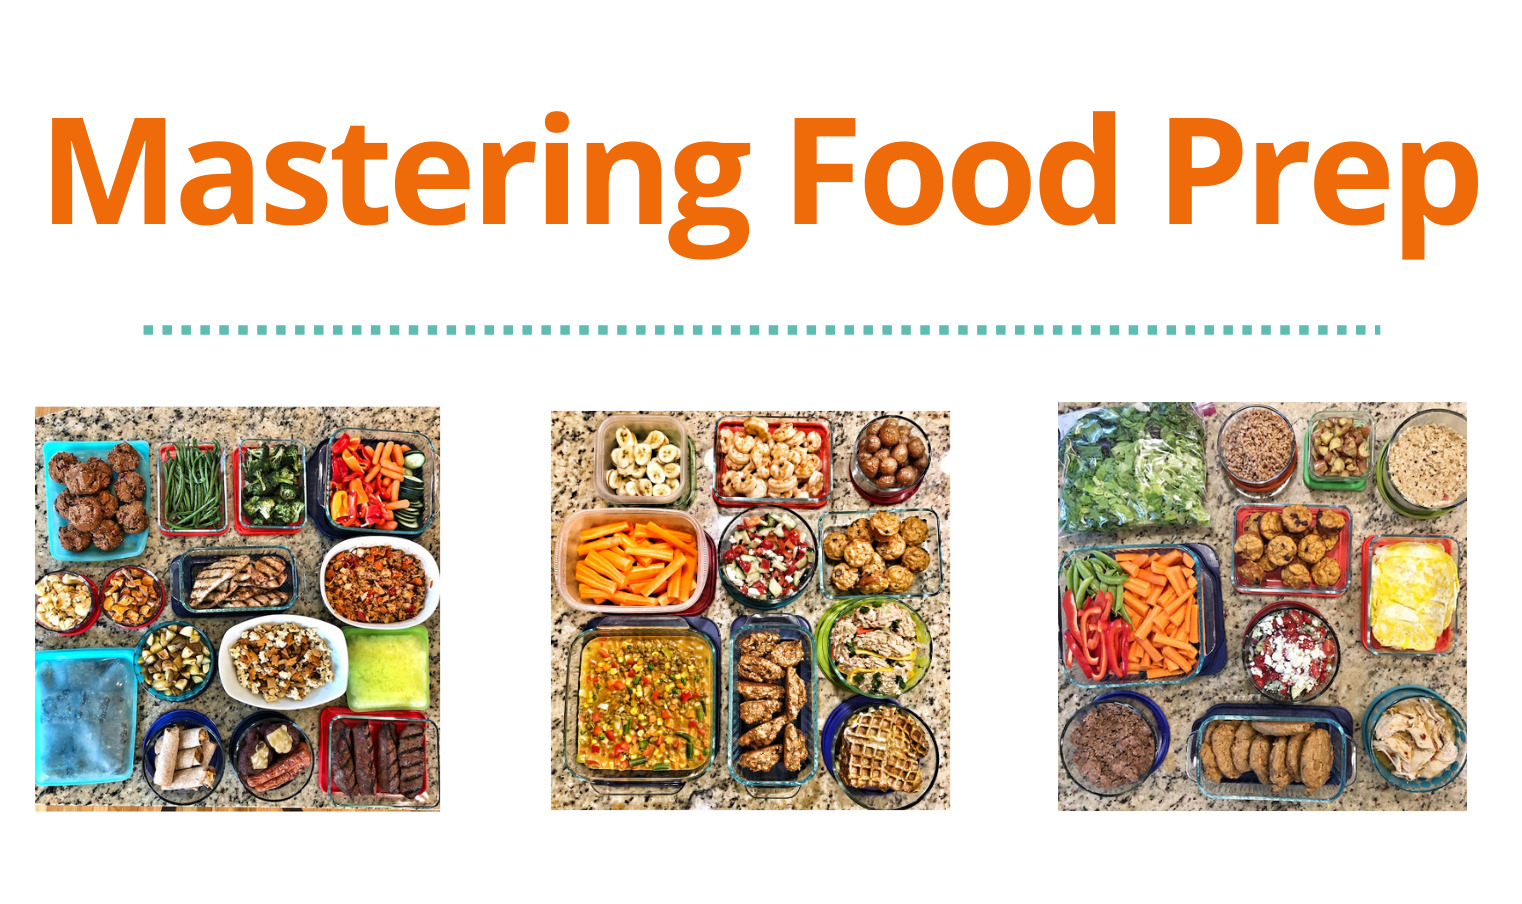 Welcome to Mastering Food Prep!